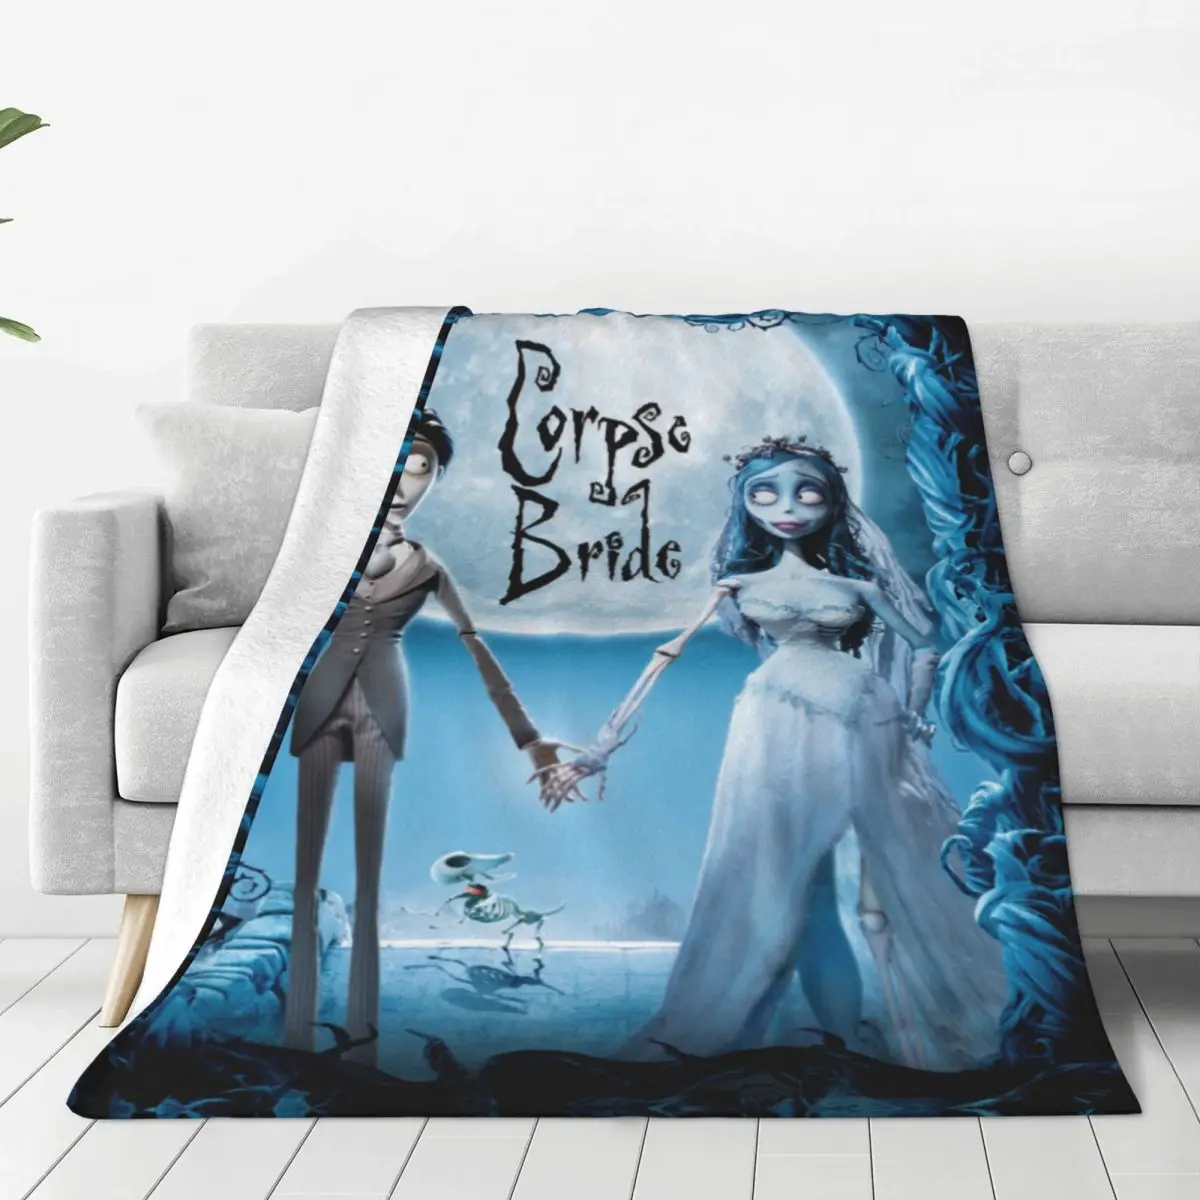 Warm Soft Blanket Camping Corpse Bride Throw Blanket Horror Movie Marry Love - $18.11+